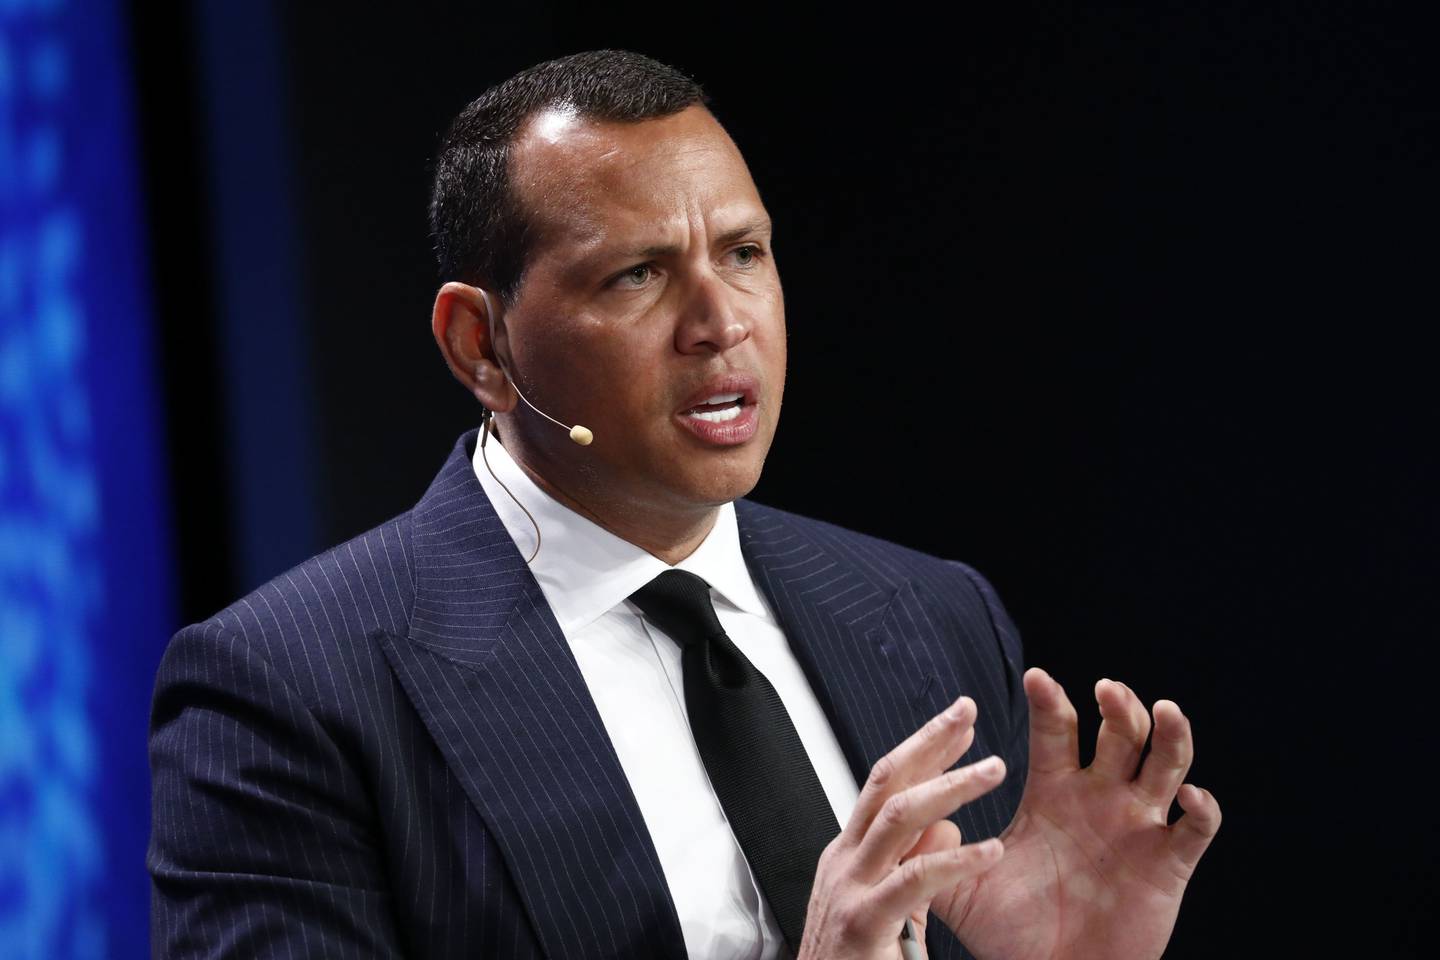 The former professional baseball player, speaks during the Milken Institute Global Conference in Beverly Hills, California, U.S., on Tuesday, April 30, 2019.